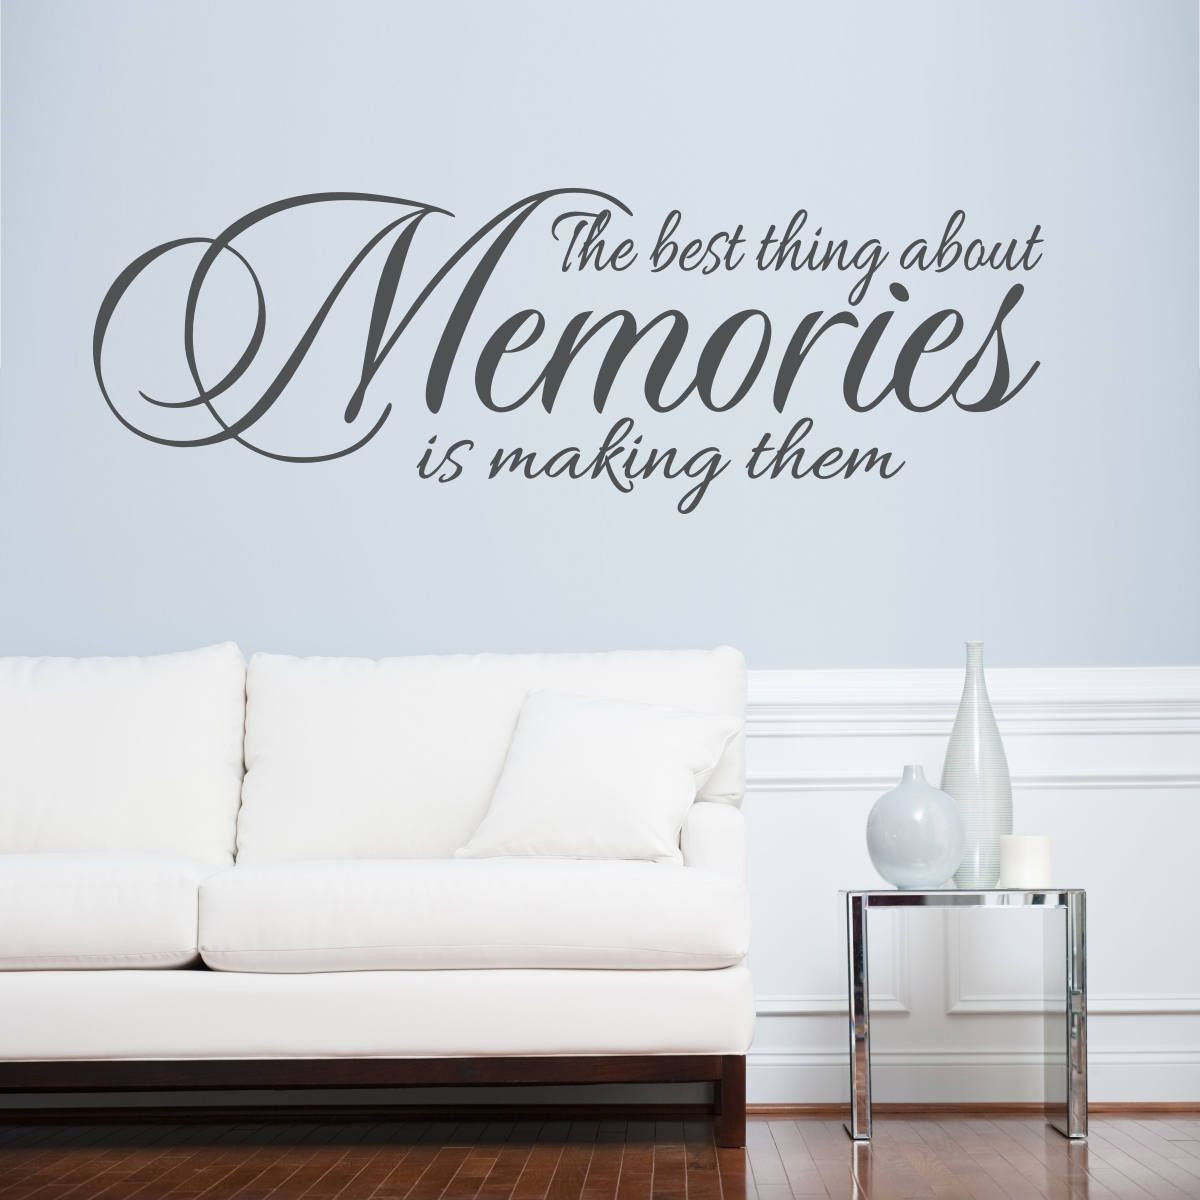 Wall Quotes For Living Room
 Making Memories Wall Quote Decal